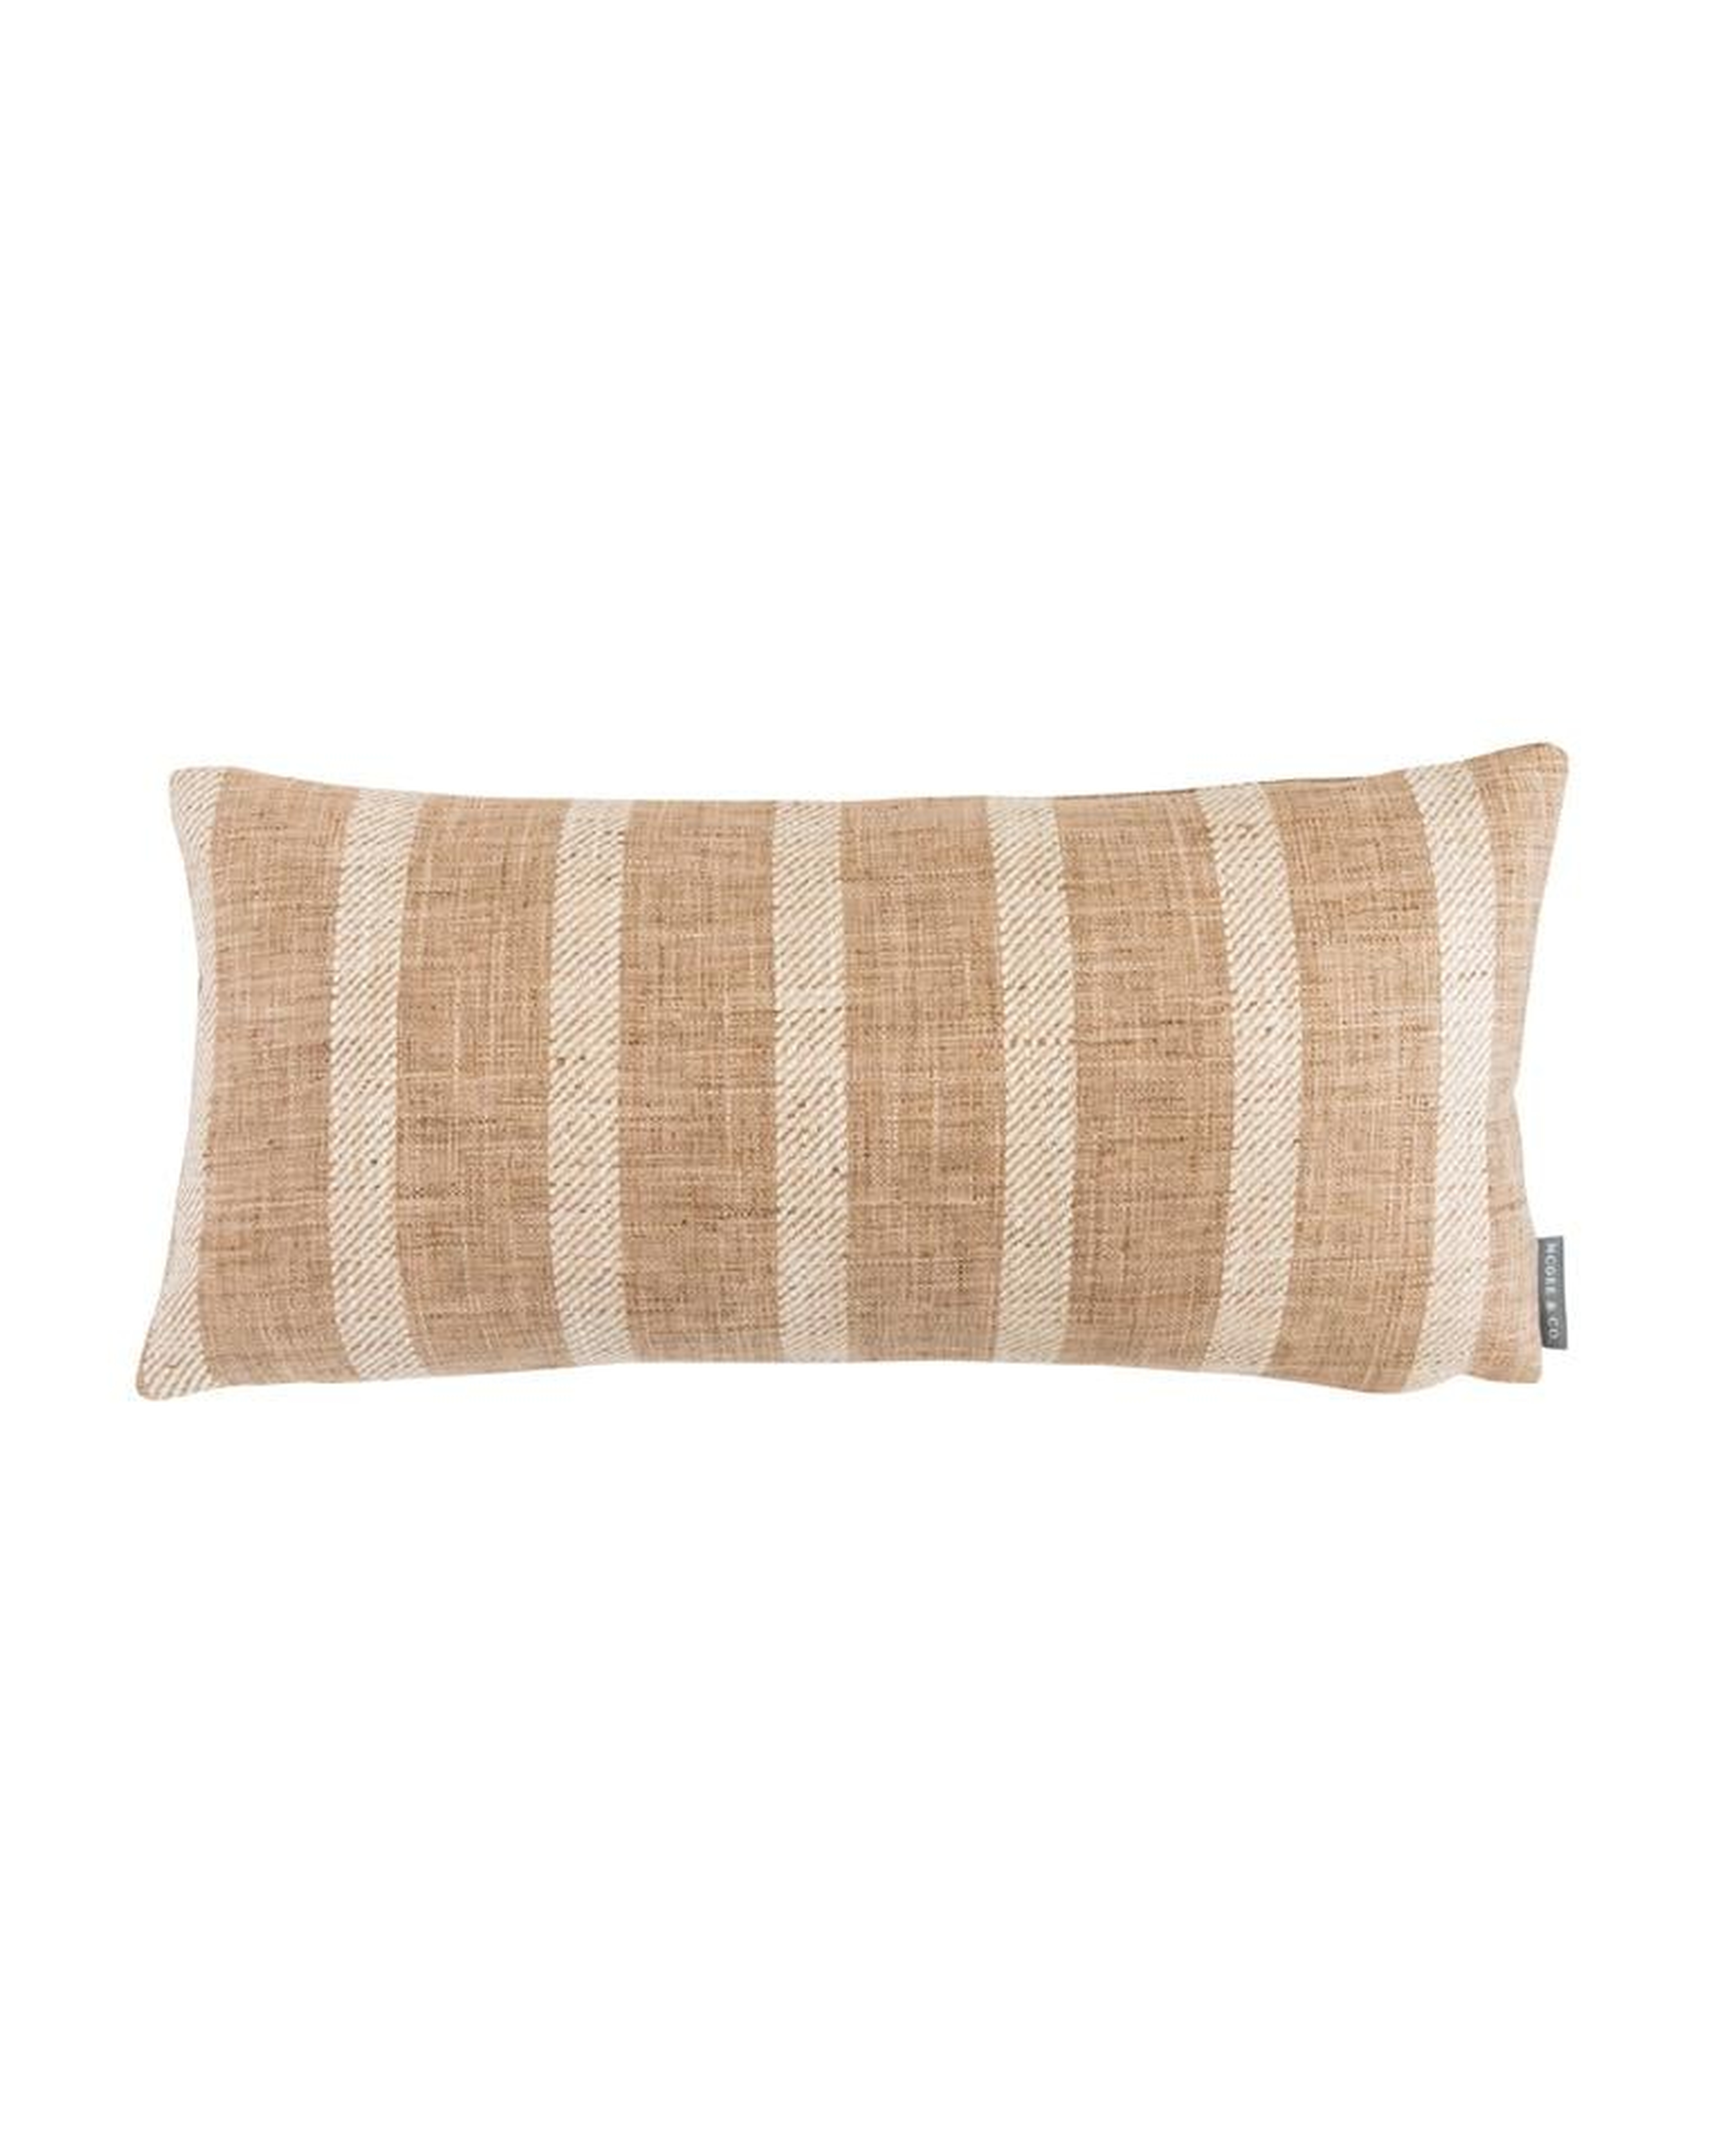 URIAH PILLOW COVER - McGee & Co.